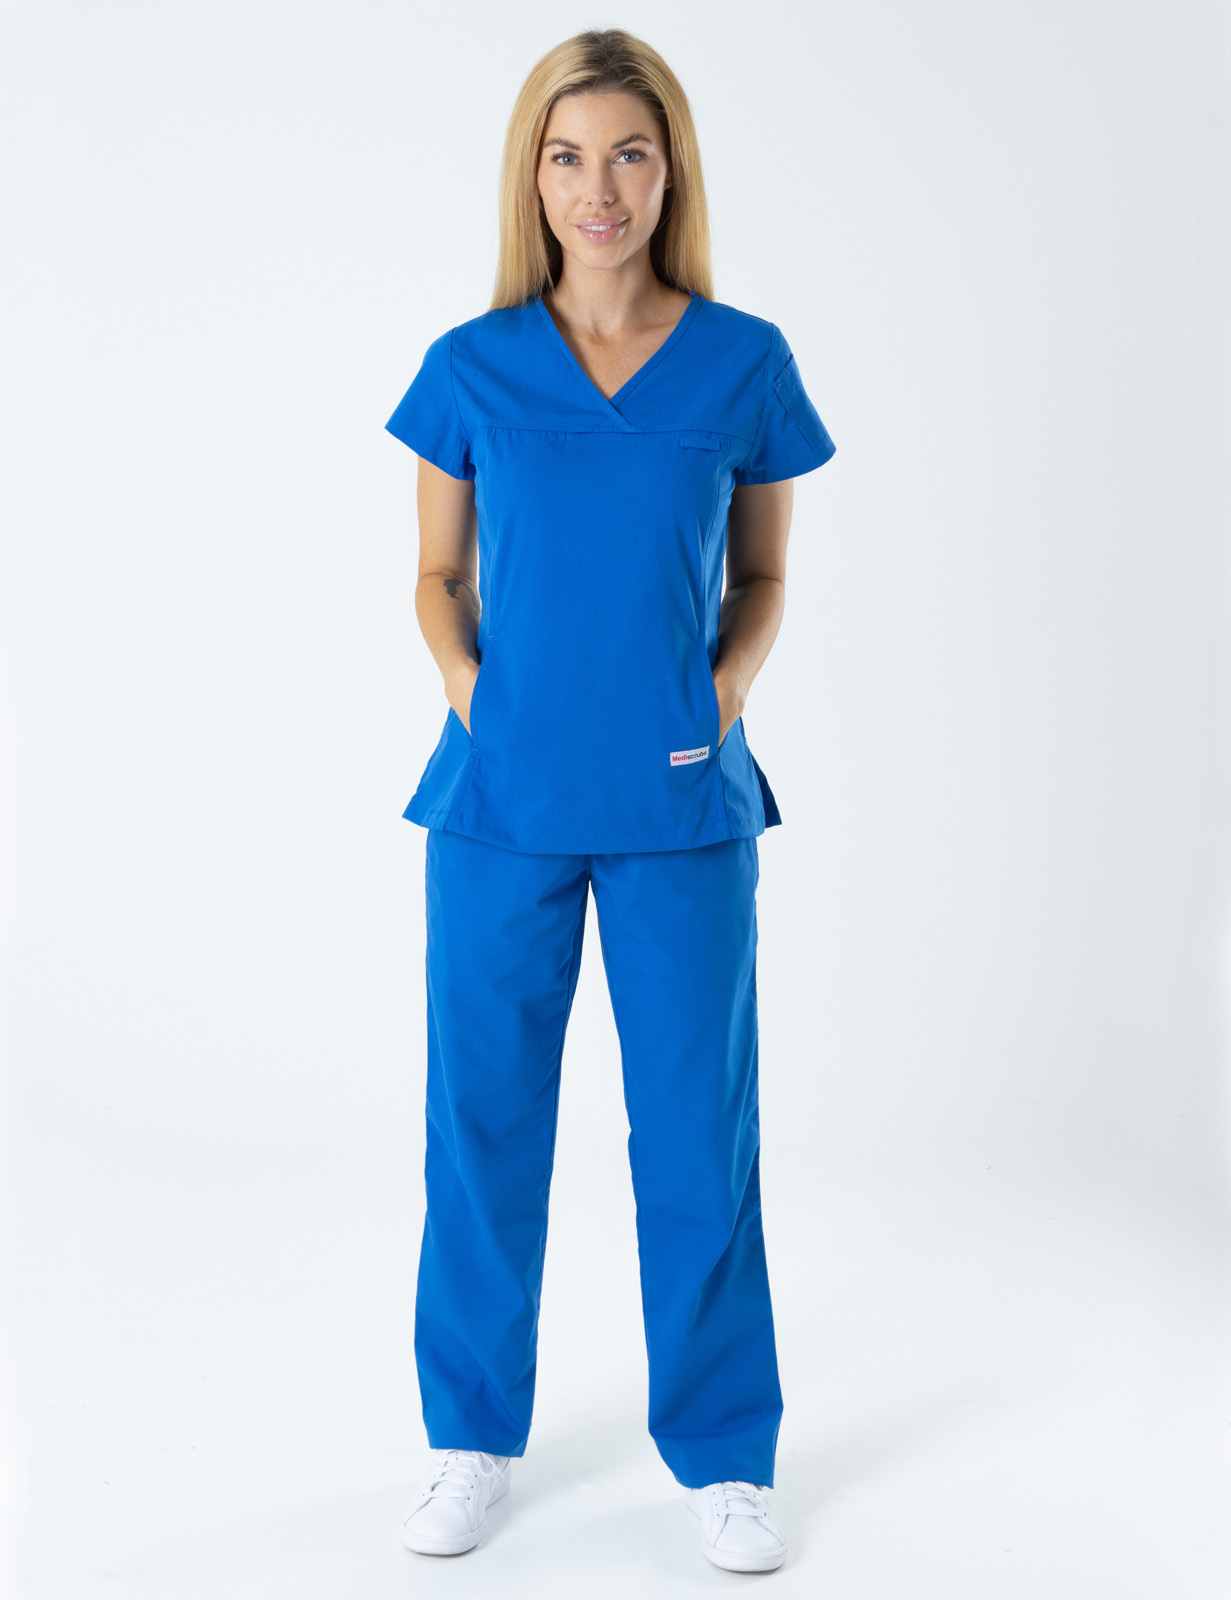 Nambour Hospital - MI Sonographer (Women's Fit Solid Scrub Top and Cargo Pants in Royal incl Logos)